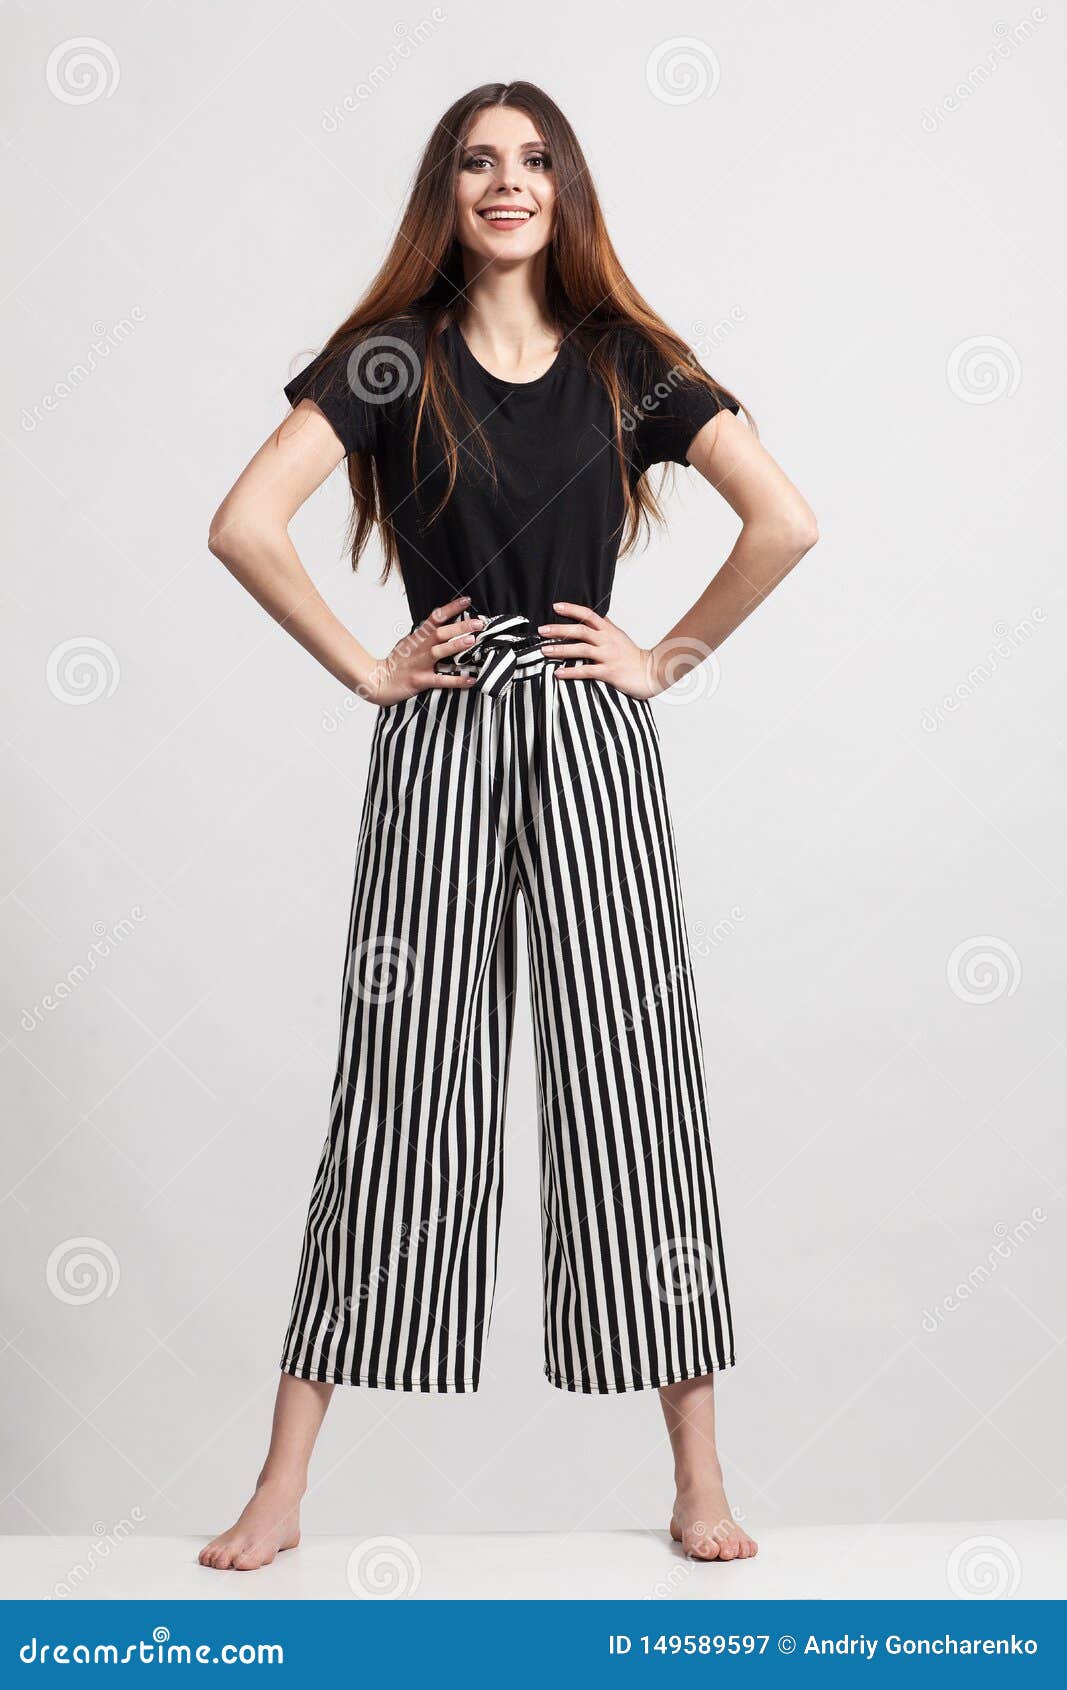 Photo Of A Beautiful Slim Woman In Full Growth Dressed In A Black